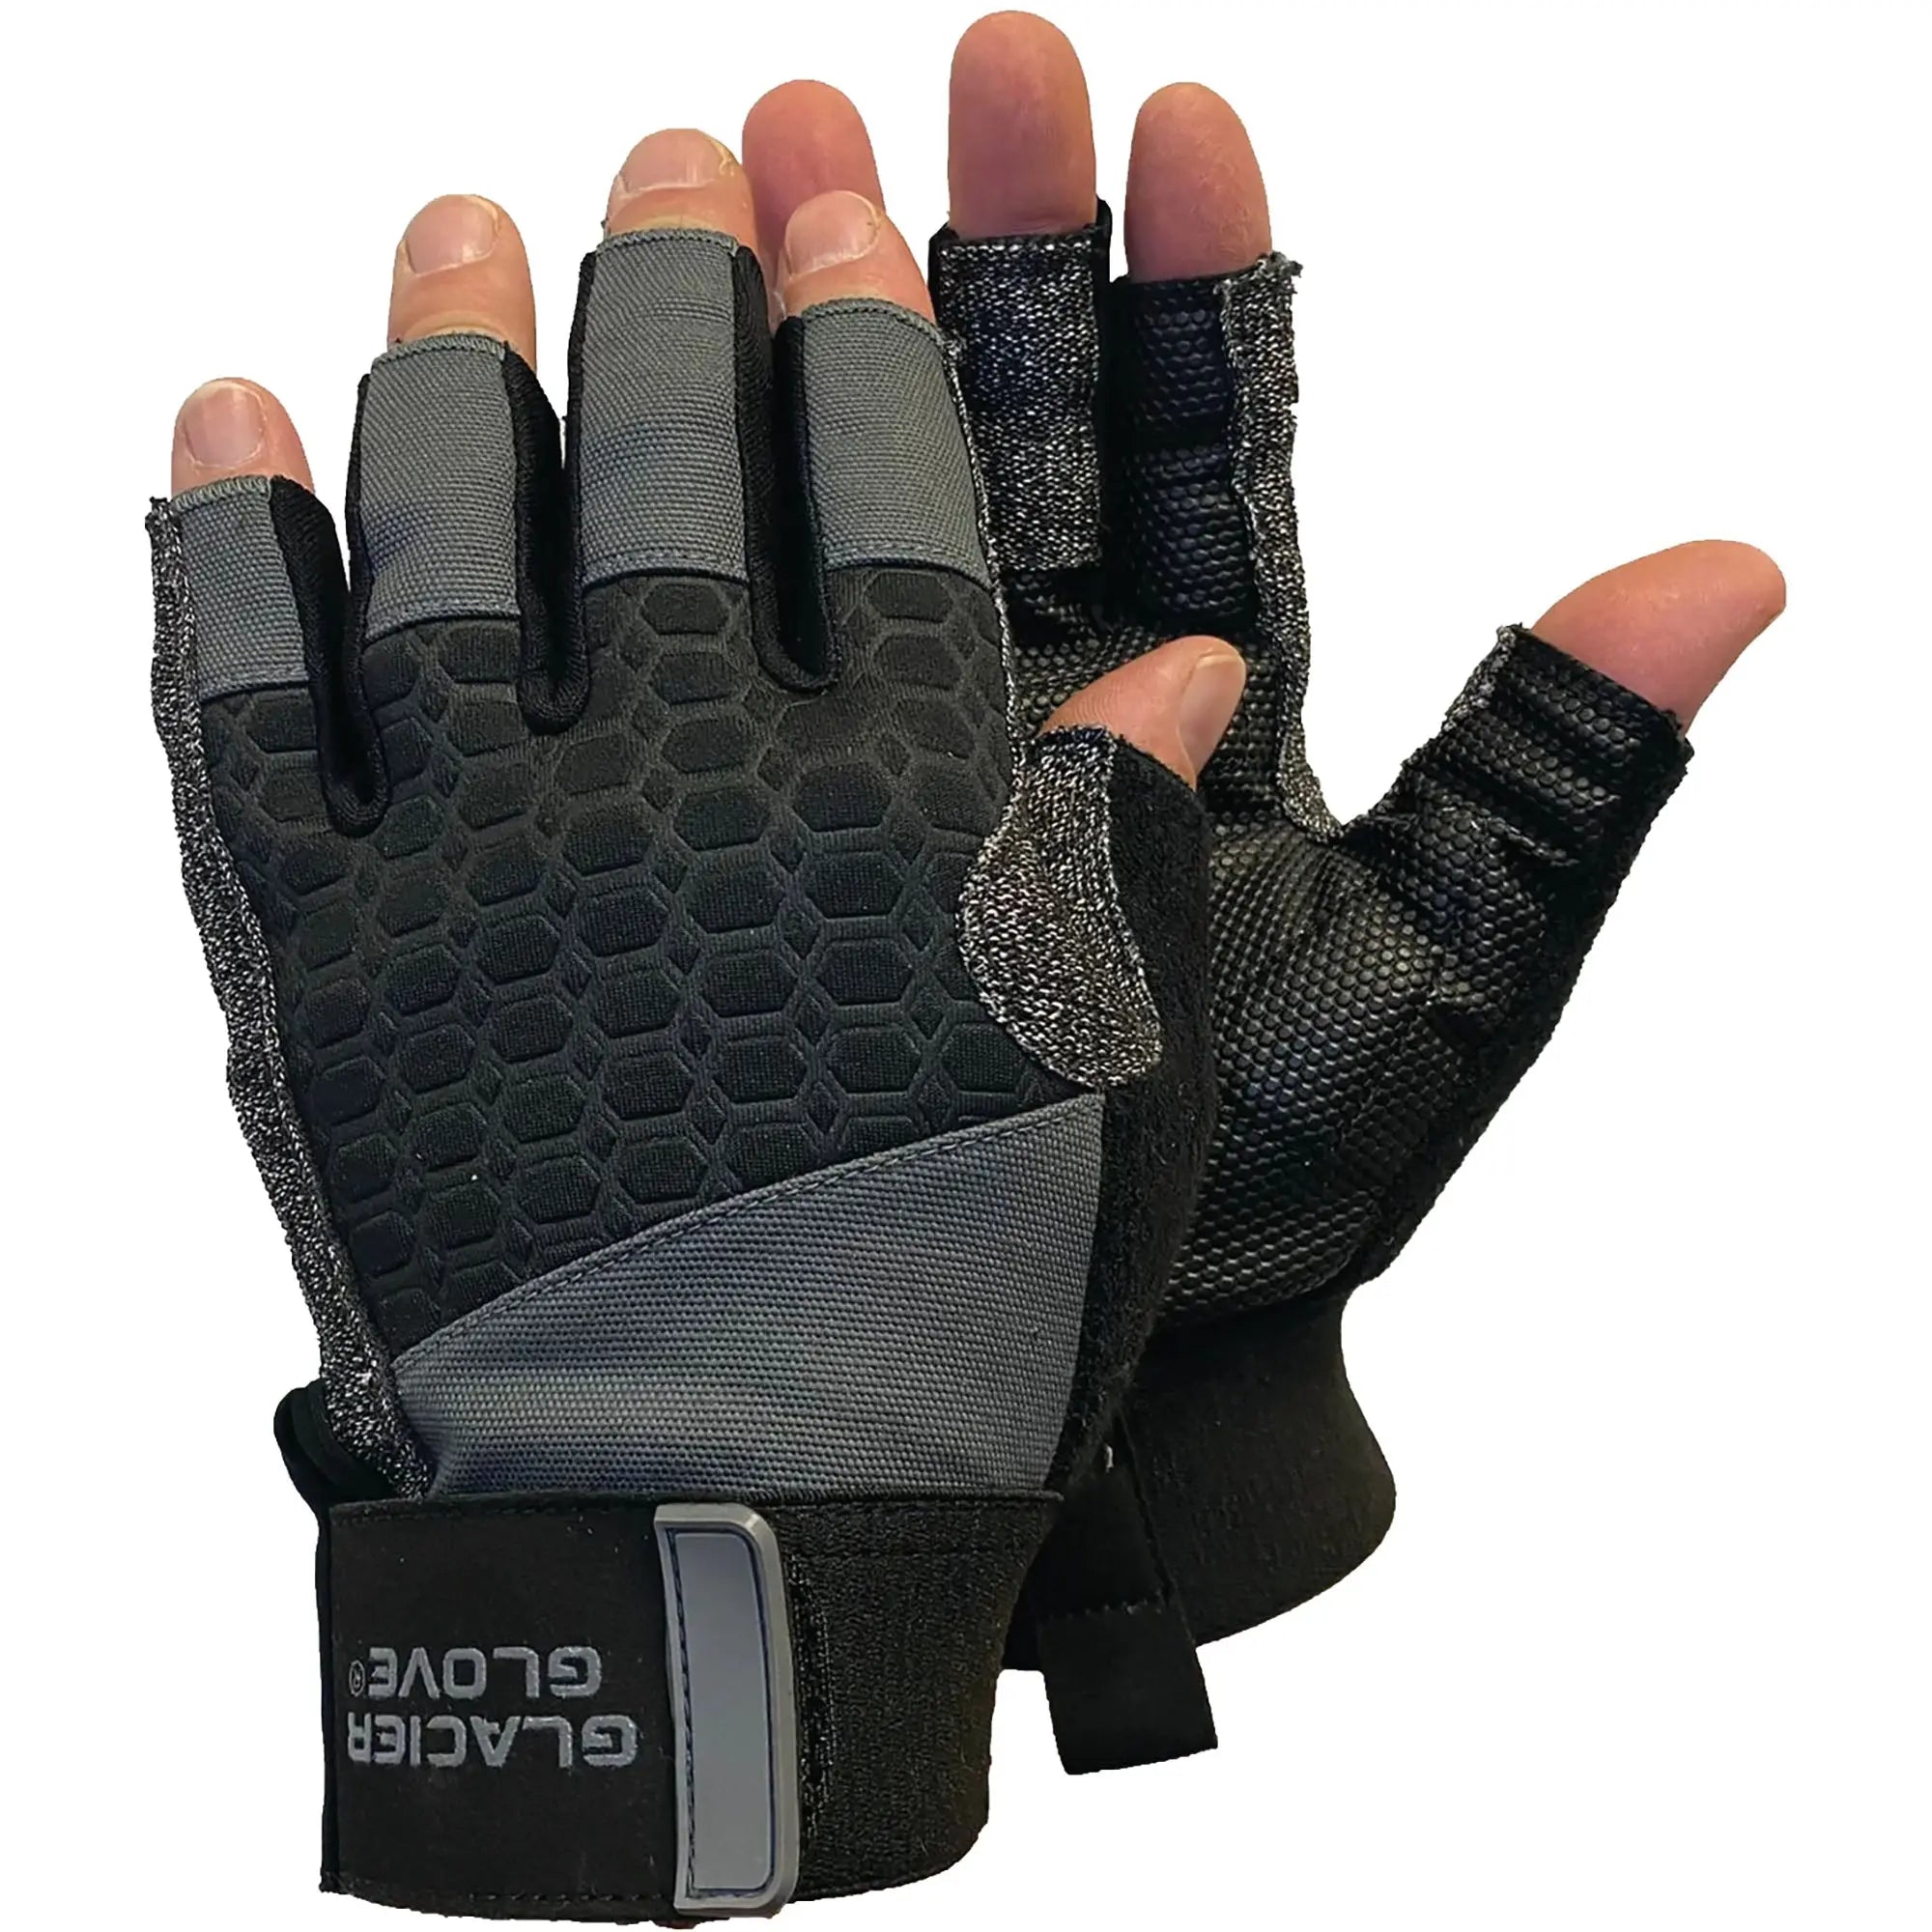 Glacier Glove Stripping and Fish Fighting Fingerless Gloves - Gray